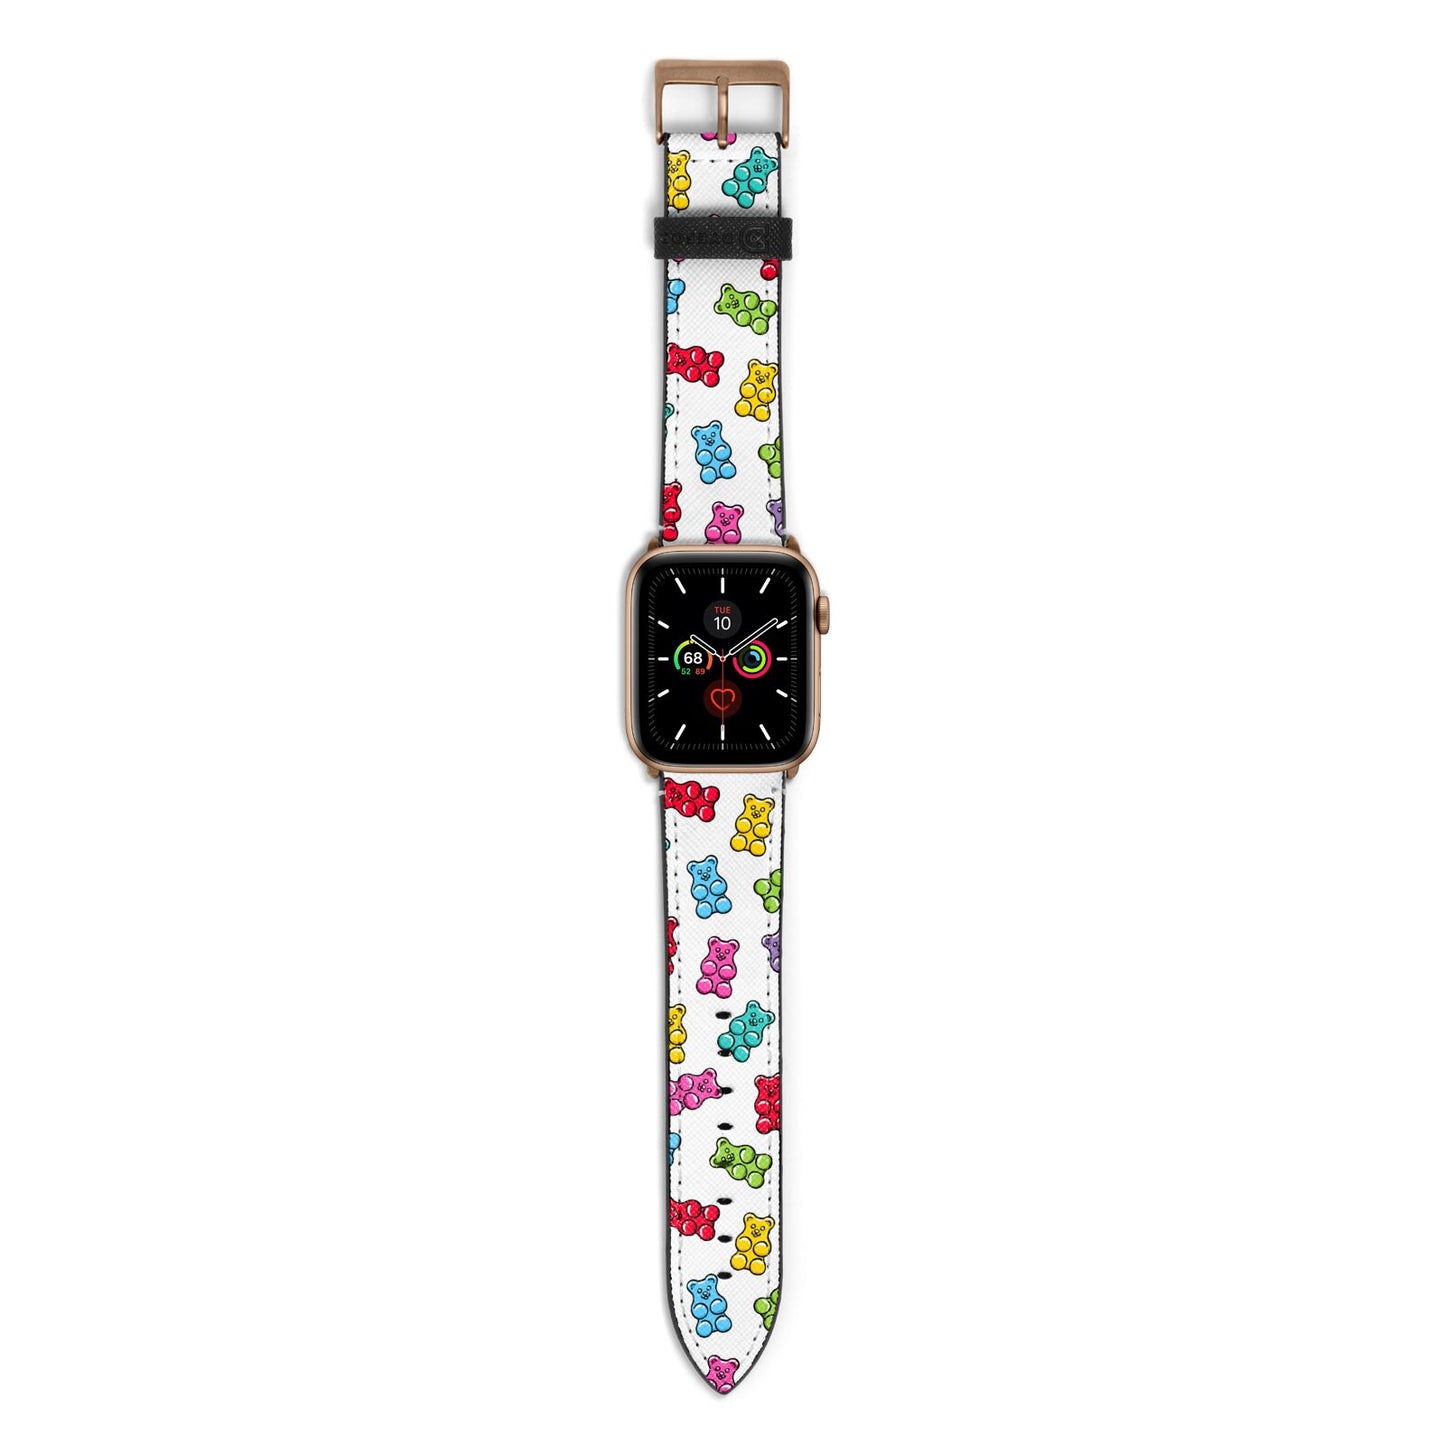 Gummy Bear Apple Watch Strap with Gold Hardware